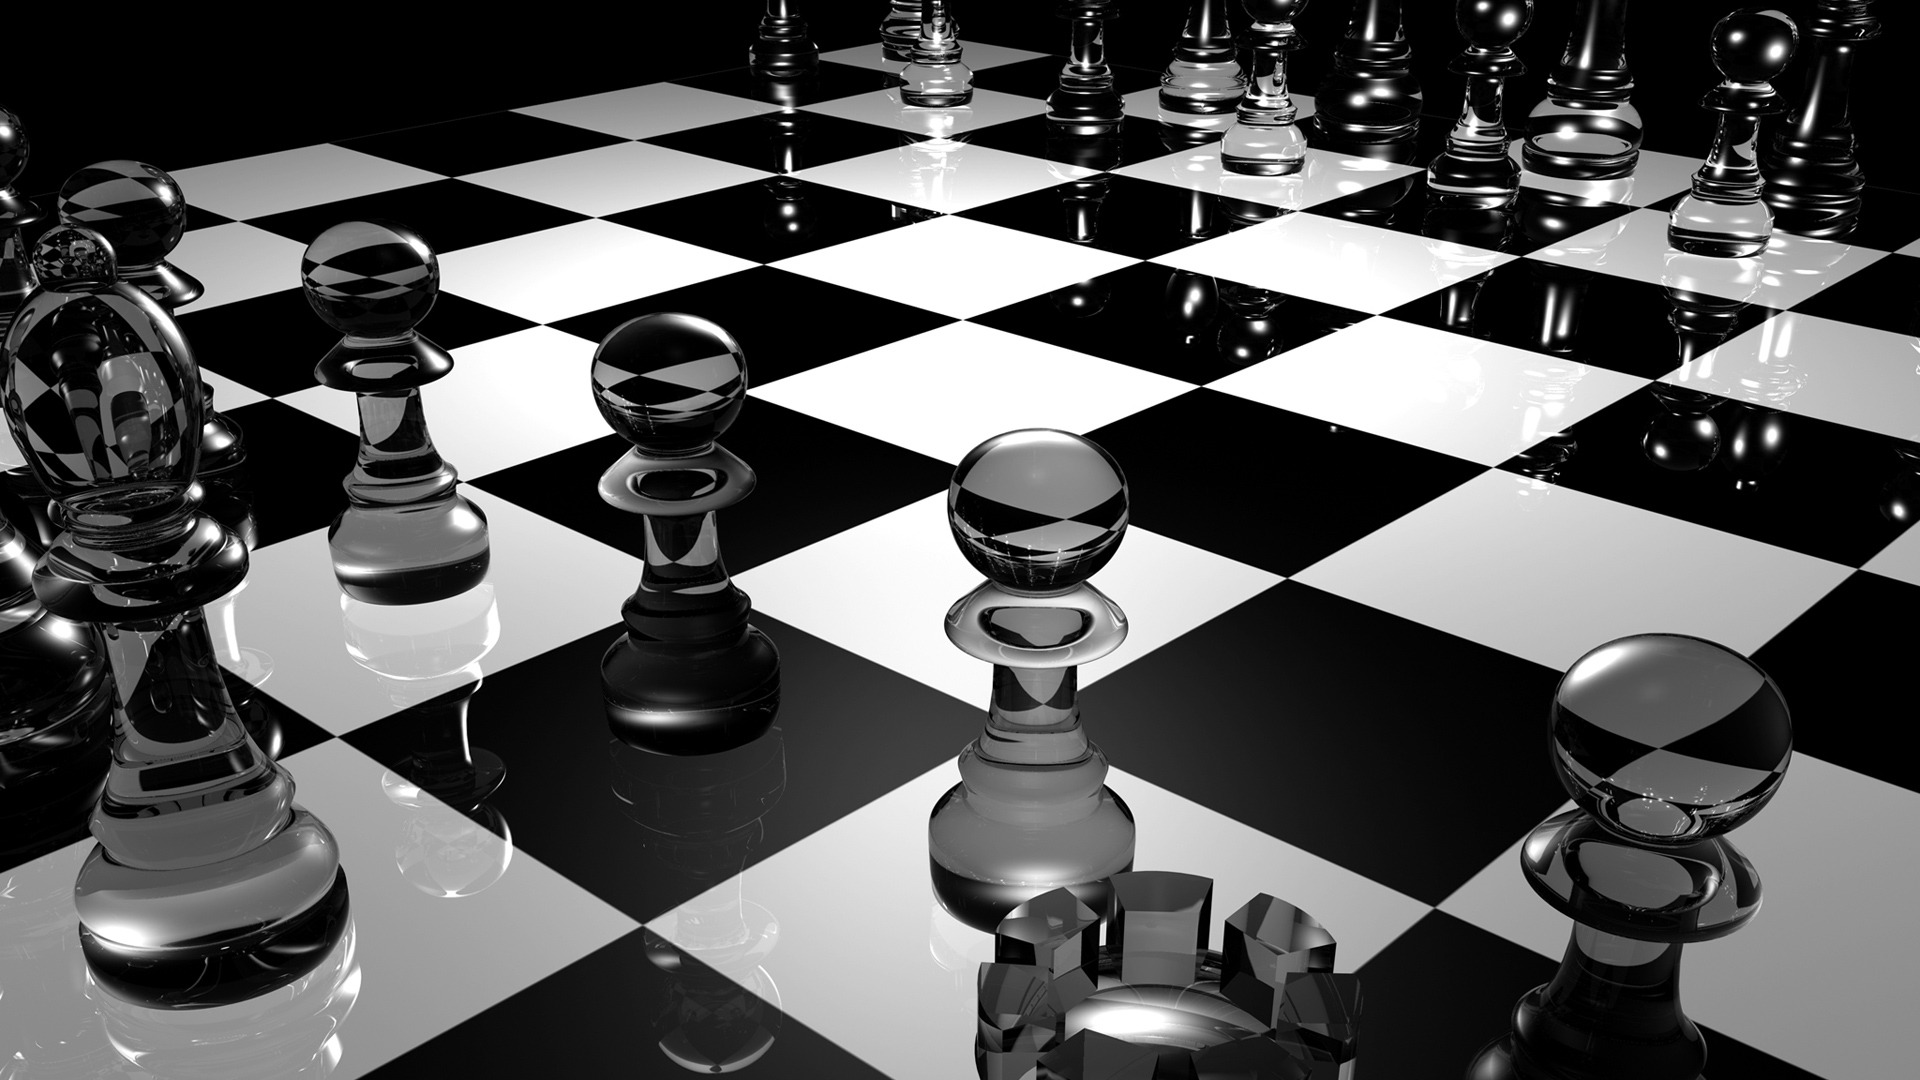 Free download Cool Chess Wallpaper 1080p 14680 Wallpaper High Resolution [1920x1080] for your Desktop, Mobile & Tablet. Explore Cool Chess Wallpaper. Chess Board Wallpaper, Chess Desktop Wallpaper, Chess Wallpaper Widescreen